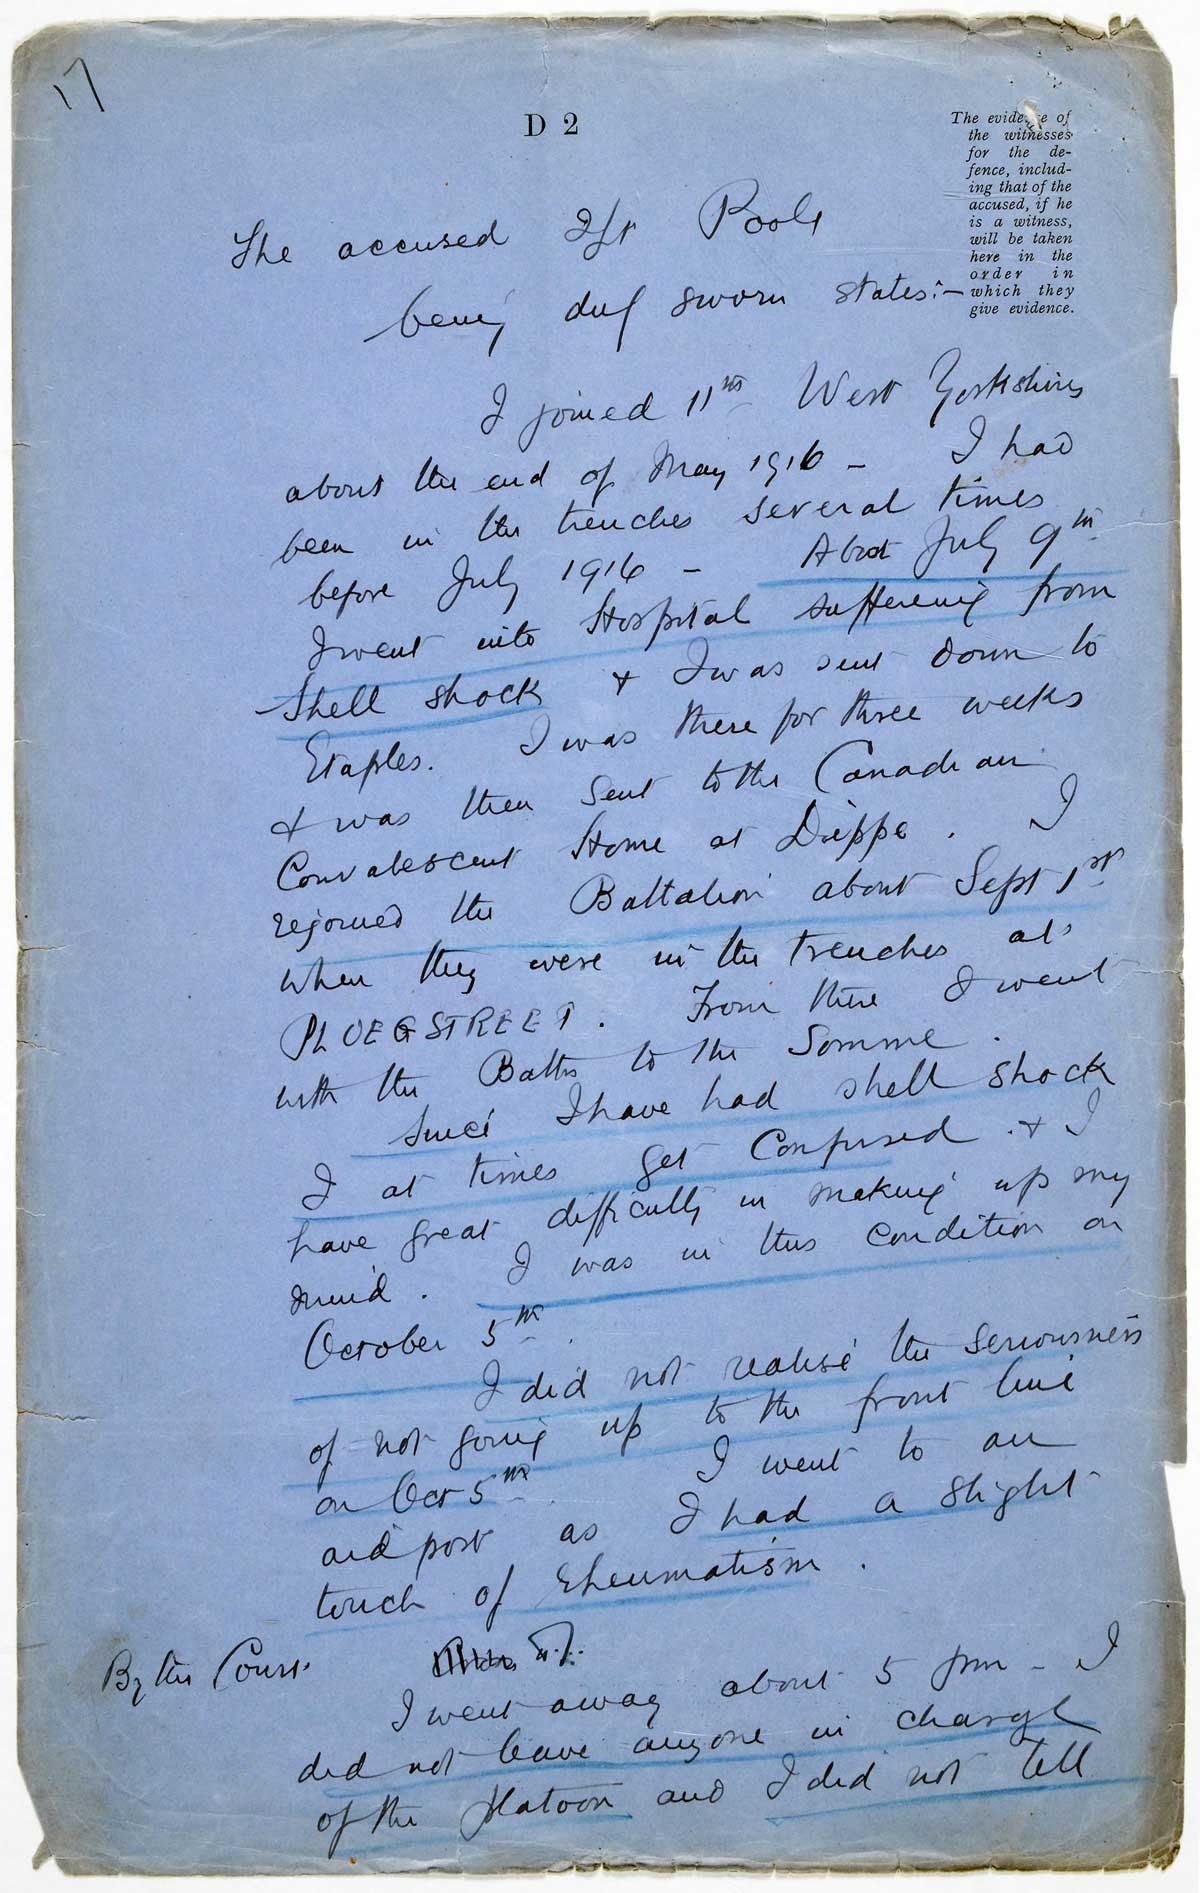 Handwritten note on blue paper starting 'I joined 11th West Yorkshire about the end of May 1916'.